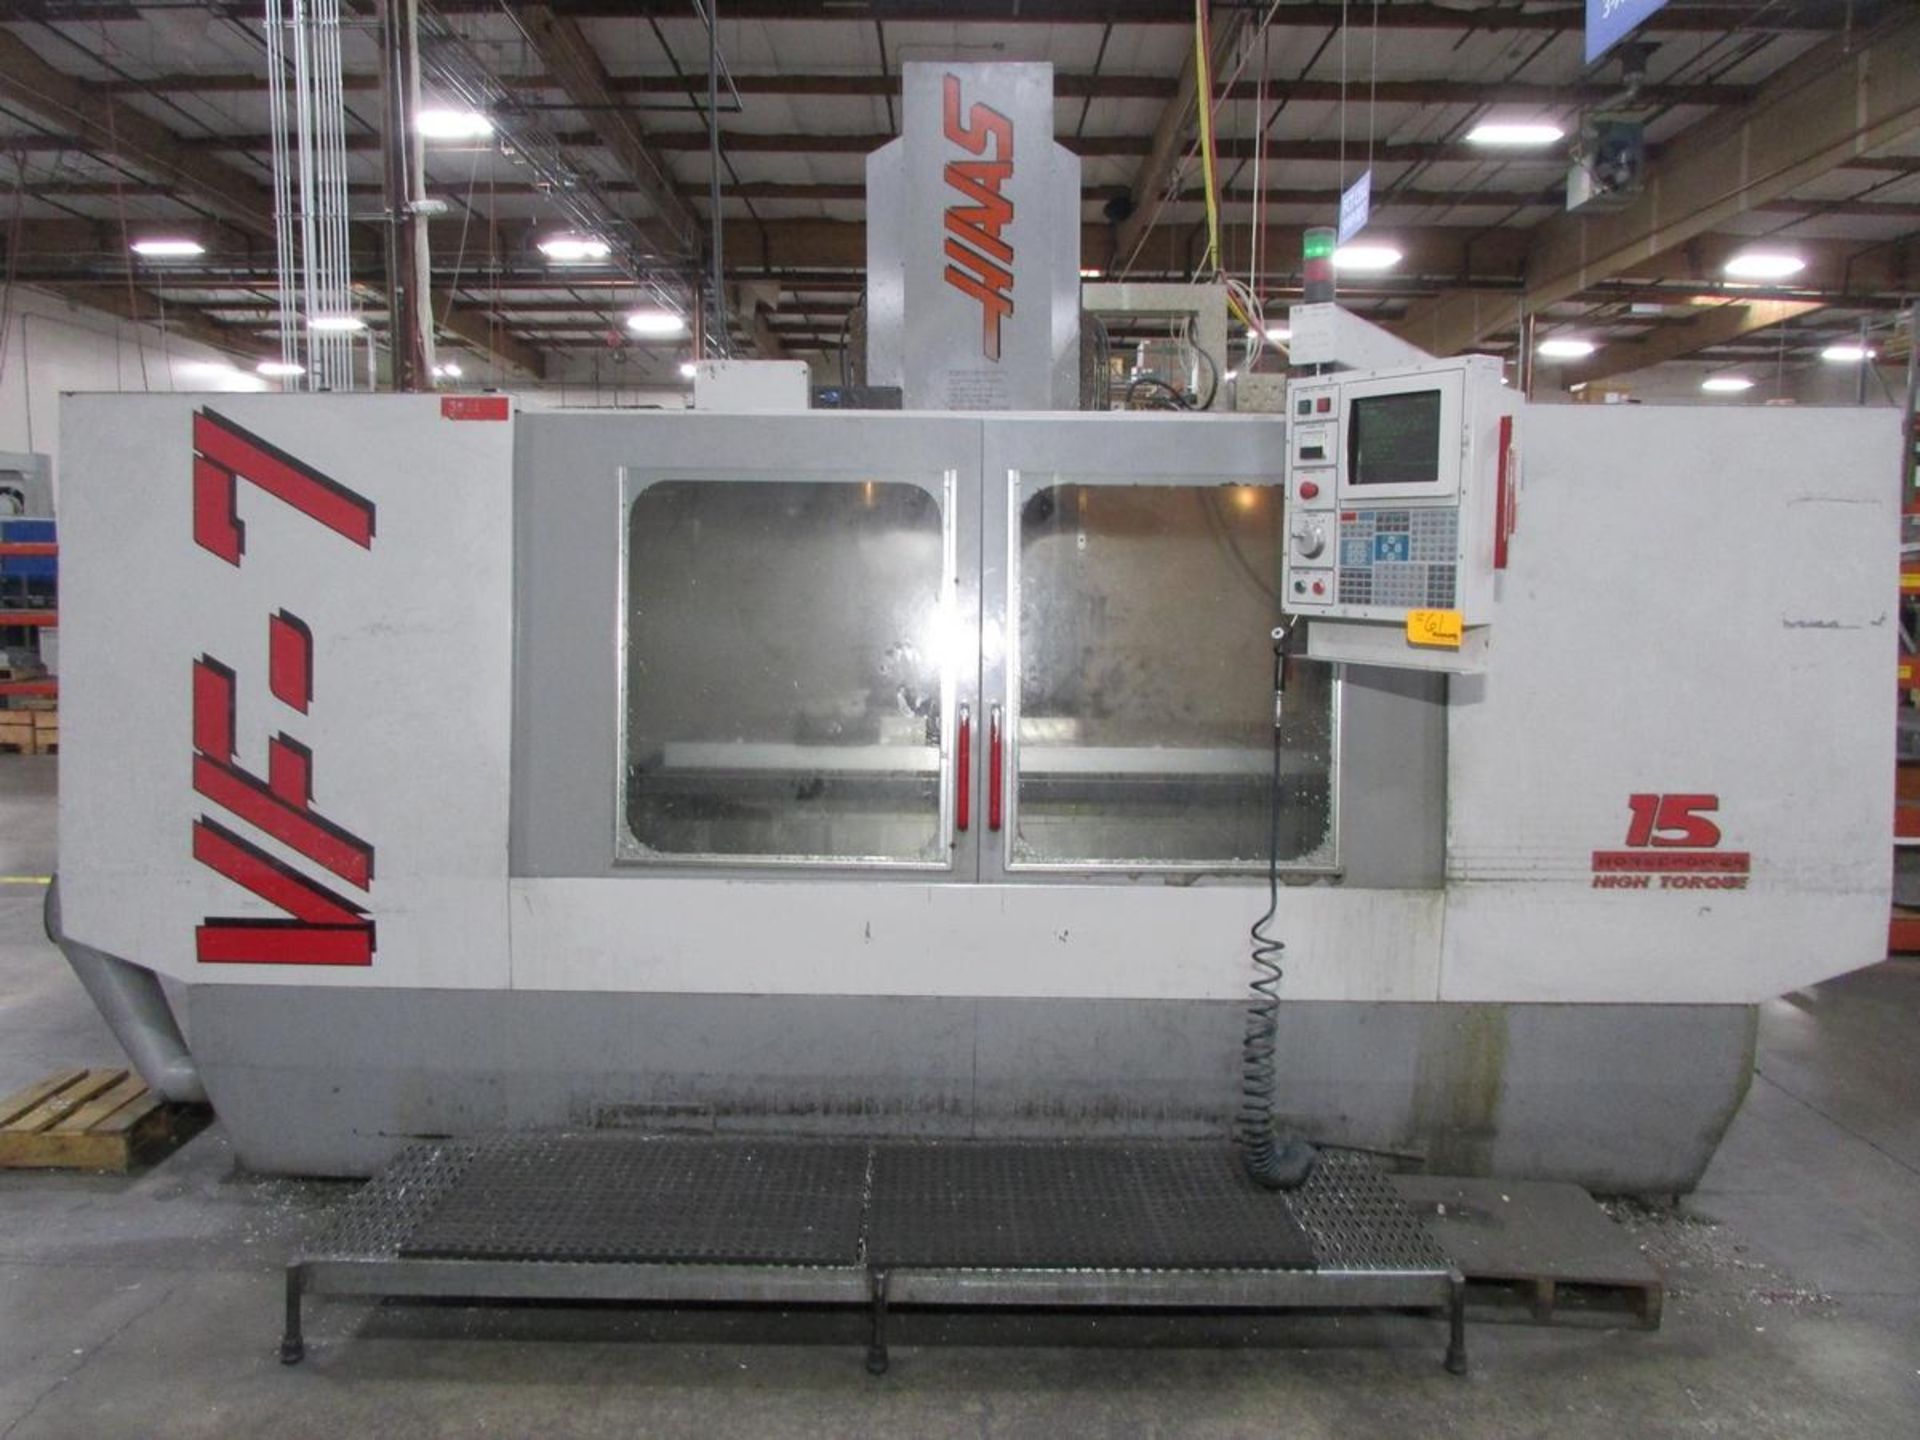 1997 Haas VF-7 4-Axis CNC Vertical Maching Center - Image 4 of 30